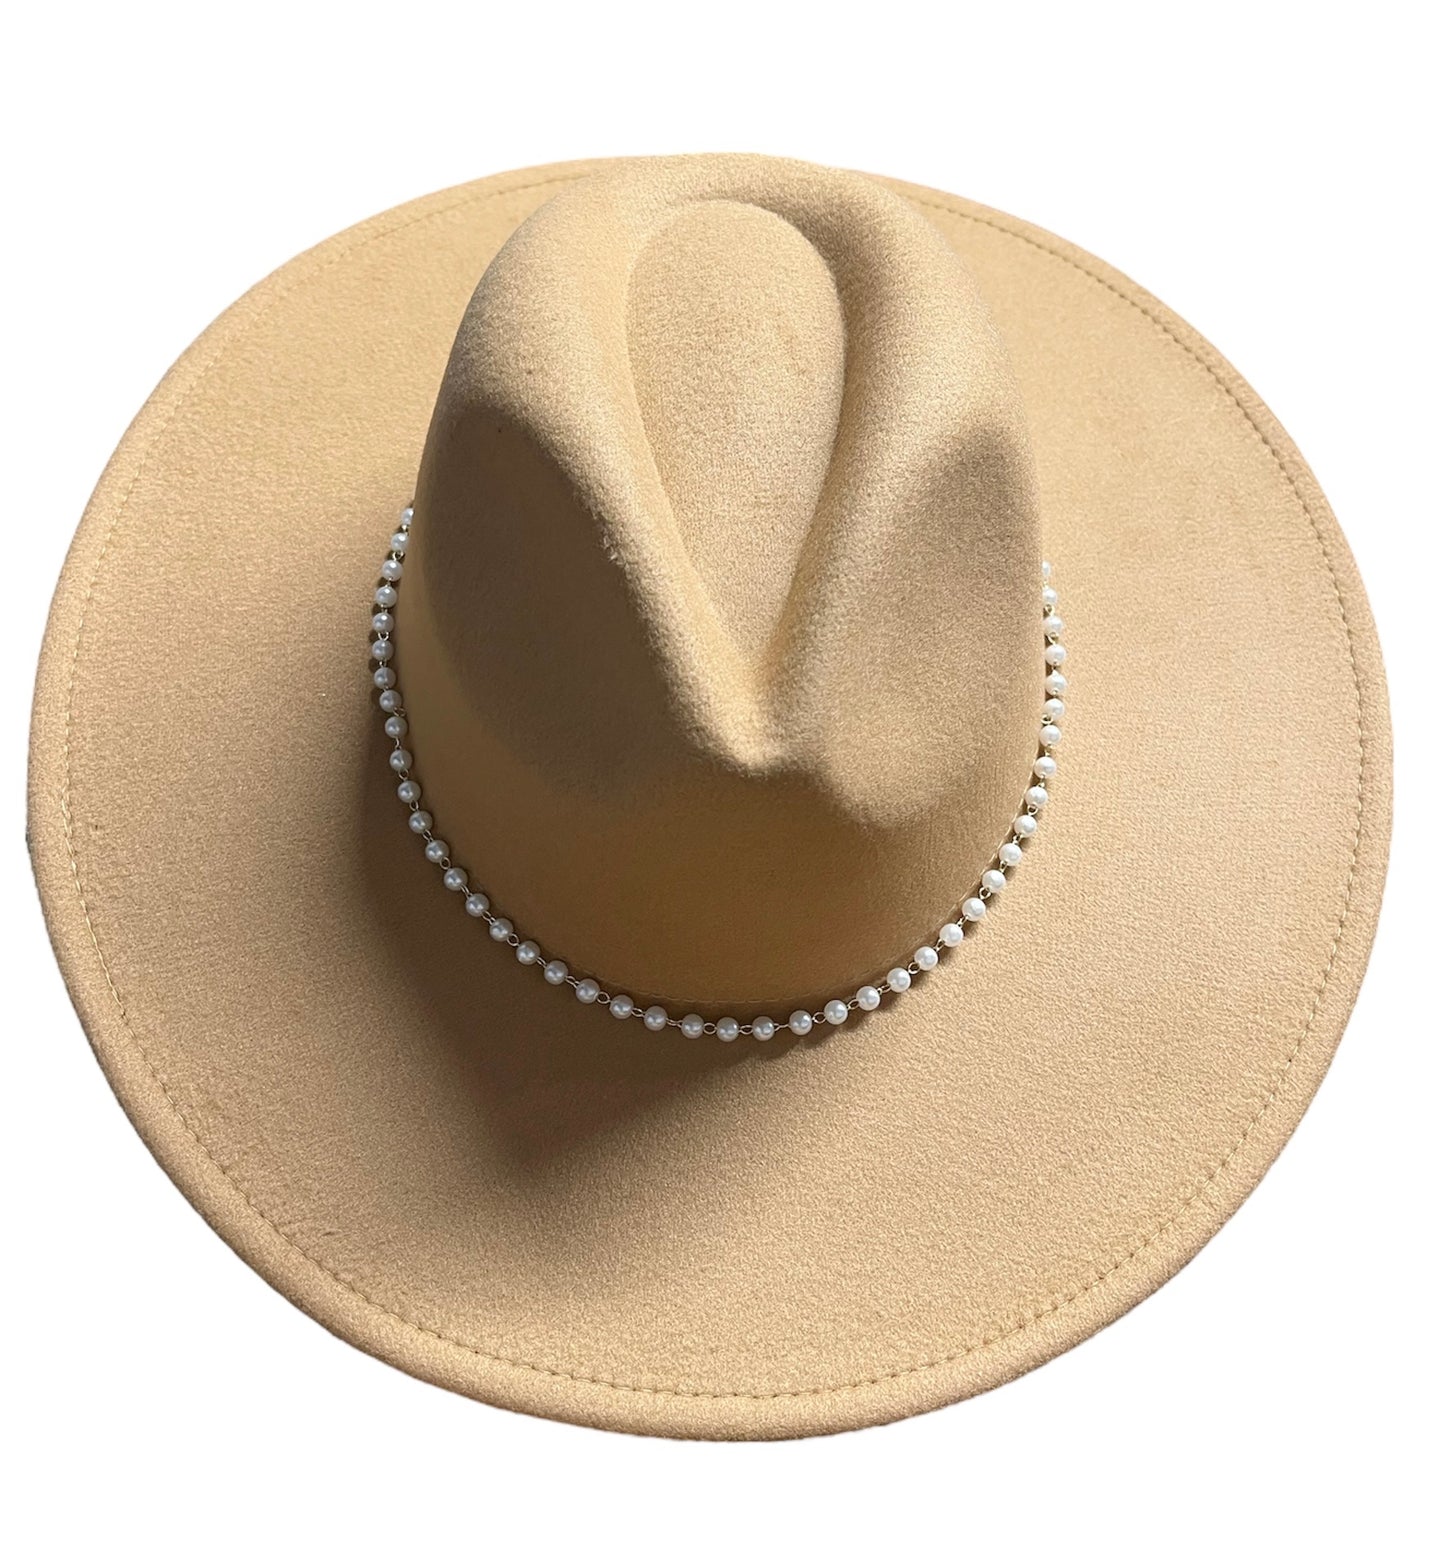 Camel Hat with Pearls